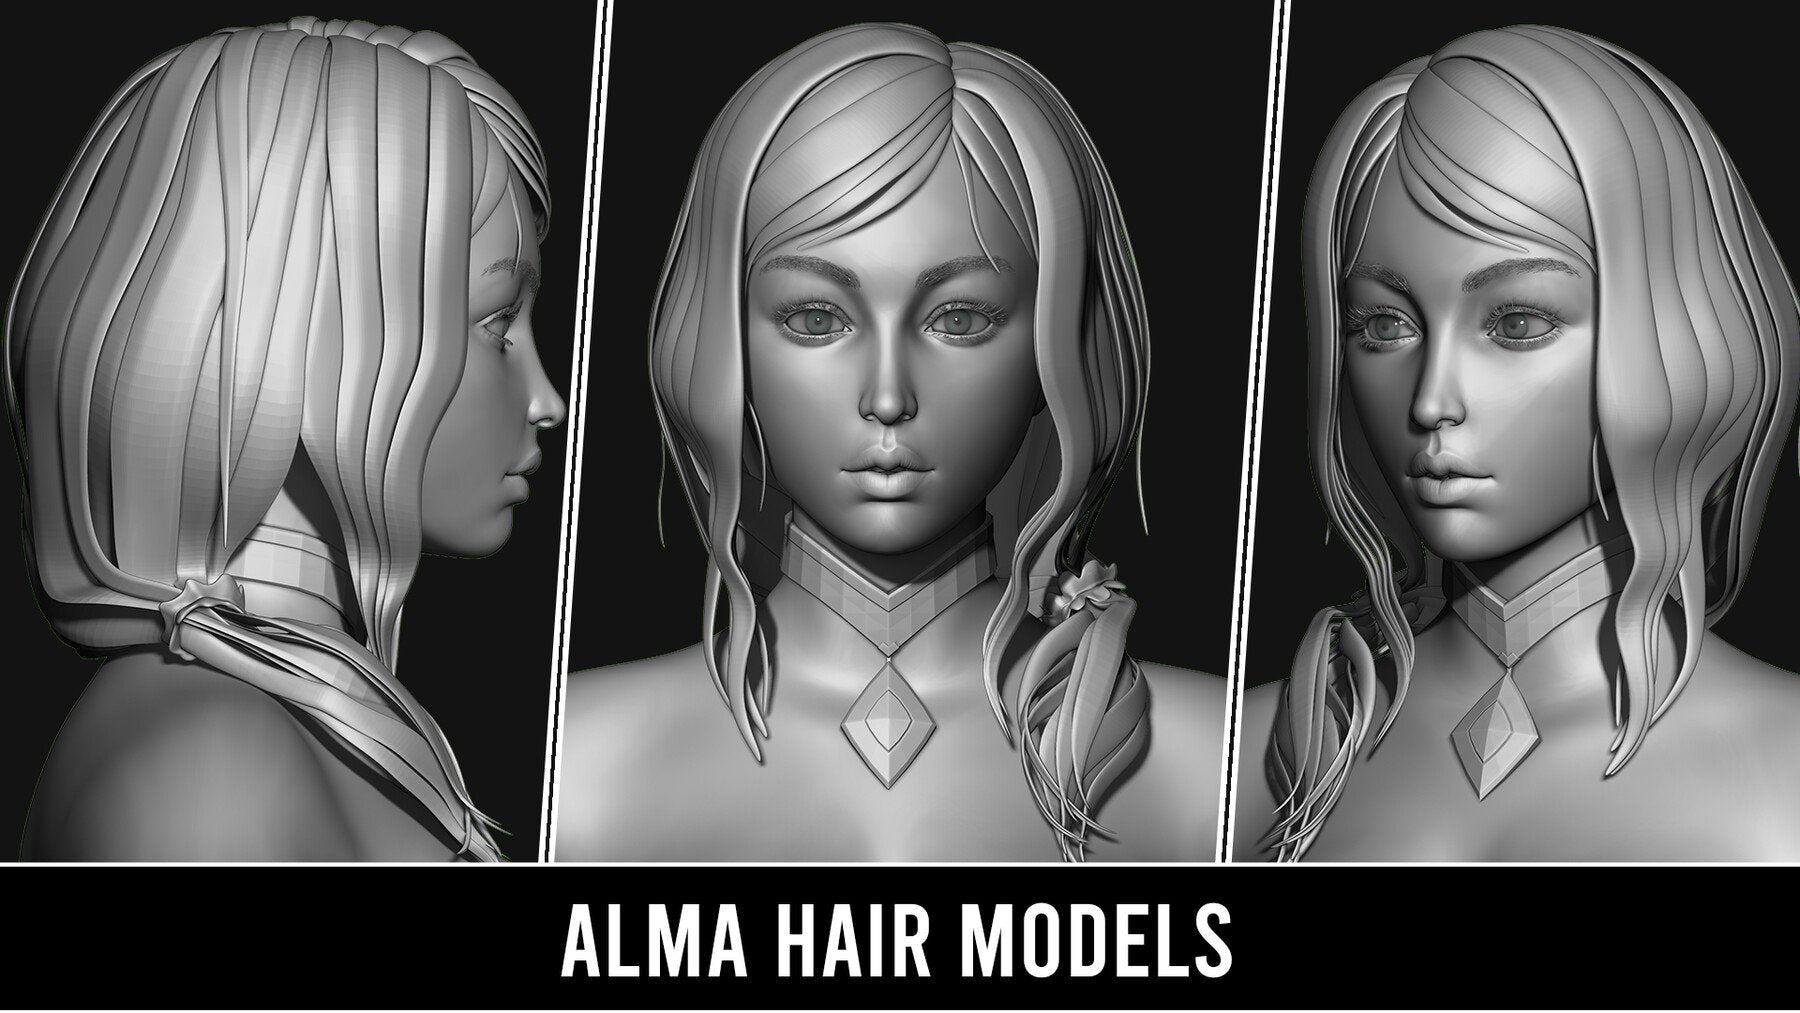 29 Hair Models With Accessories - Quad Topology + UV's